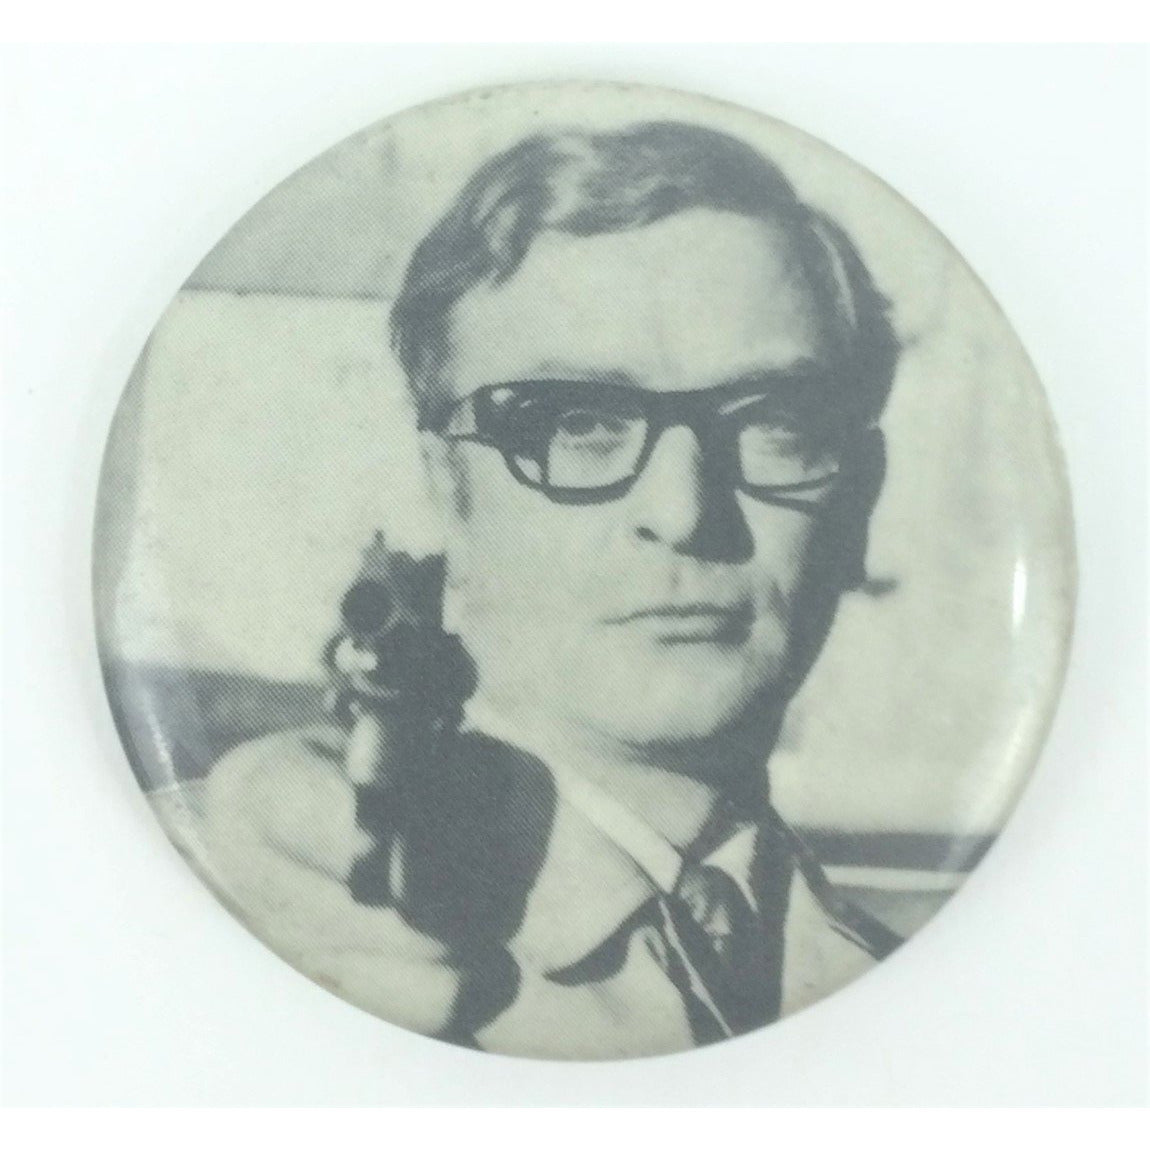 Michael Caine The Ipcress File B&W Pin